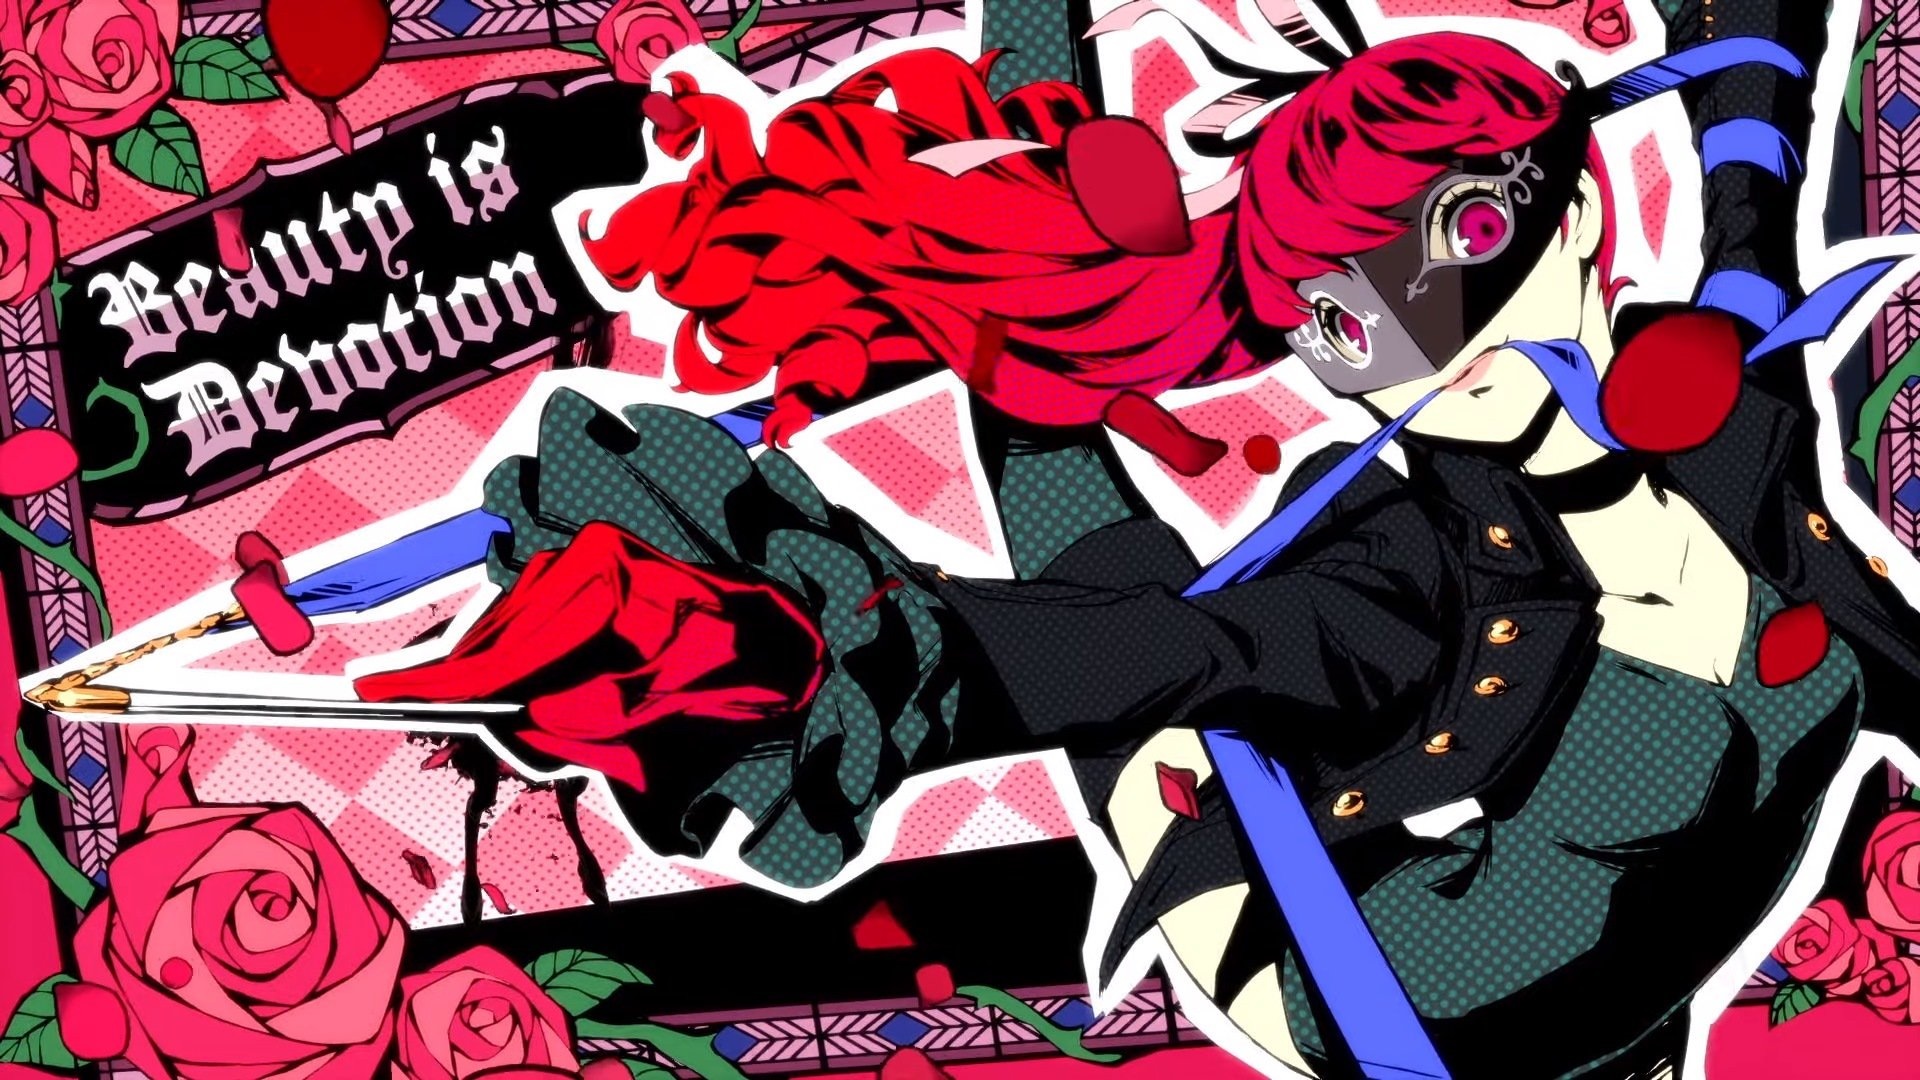 Persona 5 The Royal Revealed, Releasing for PS4 in Japan on October 31,  2019, Screenshots and Details - Persona Central